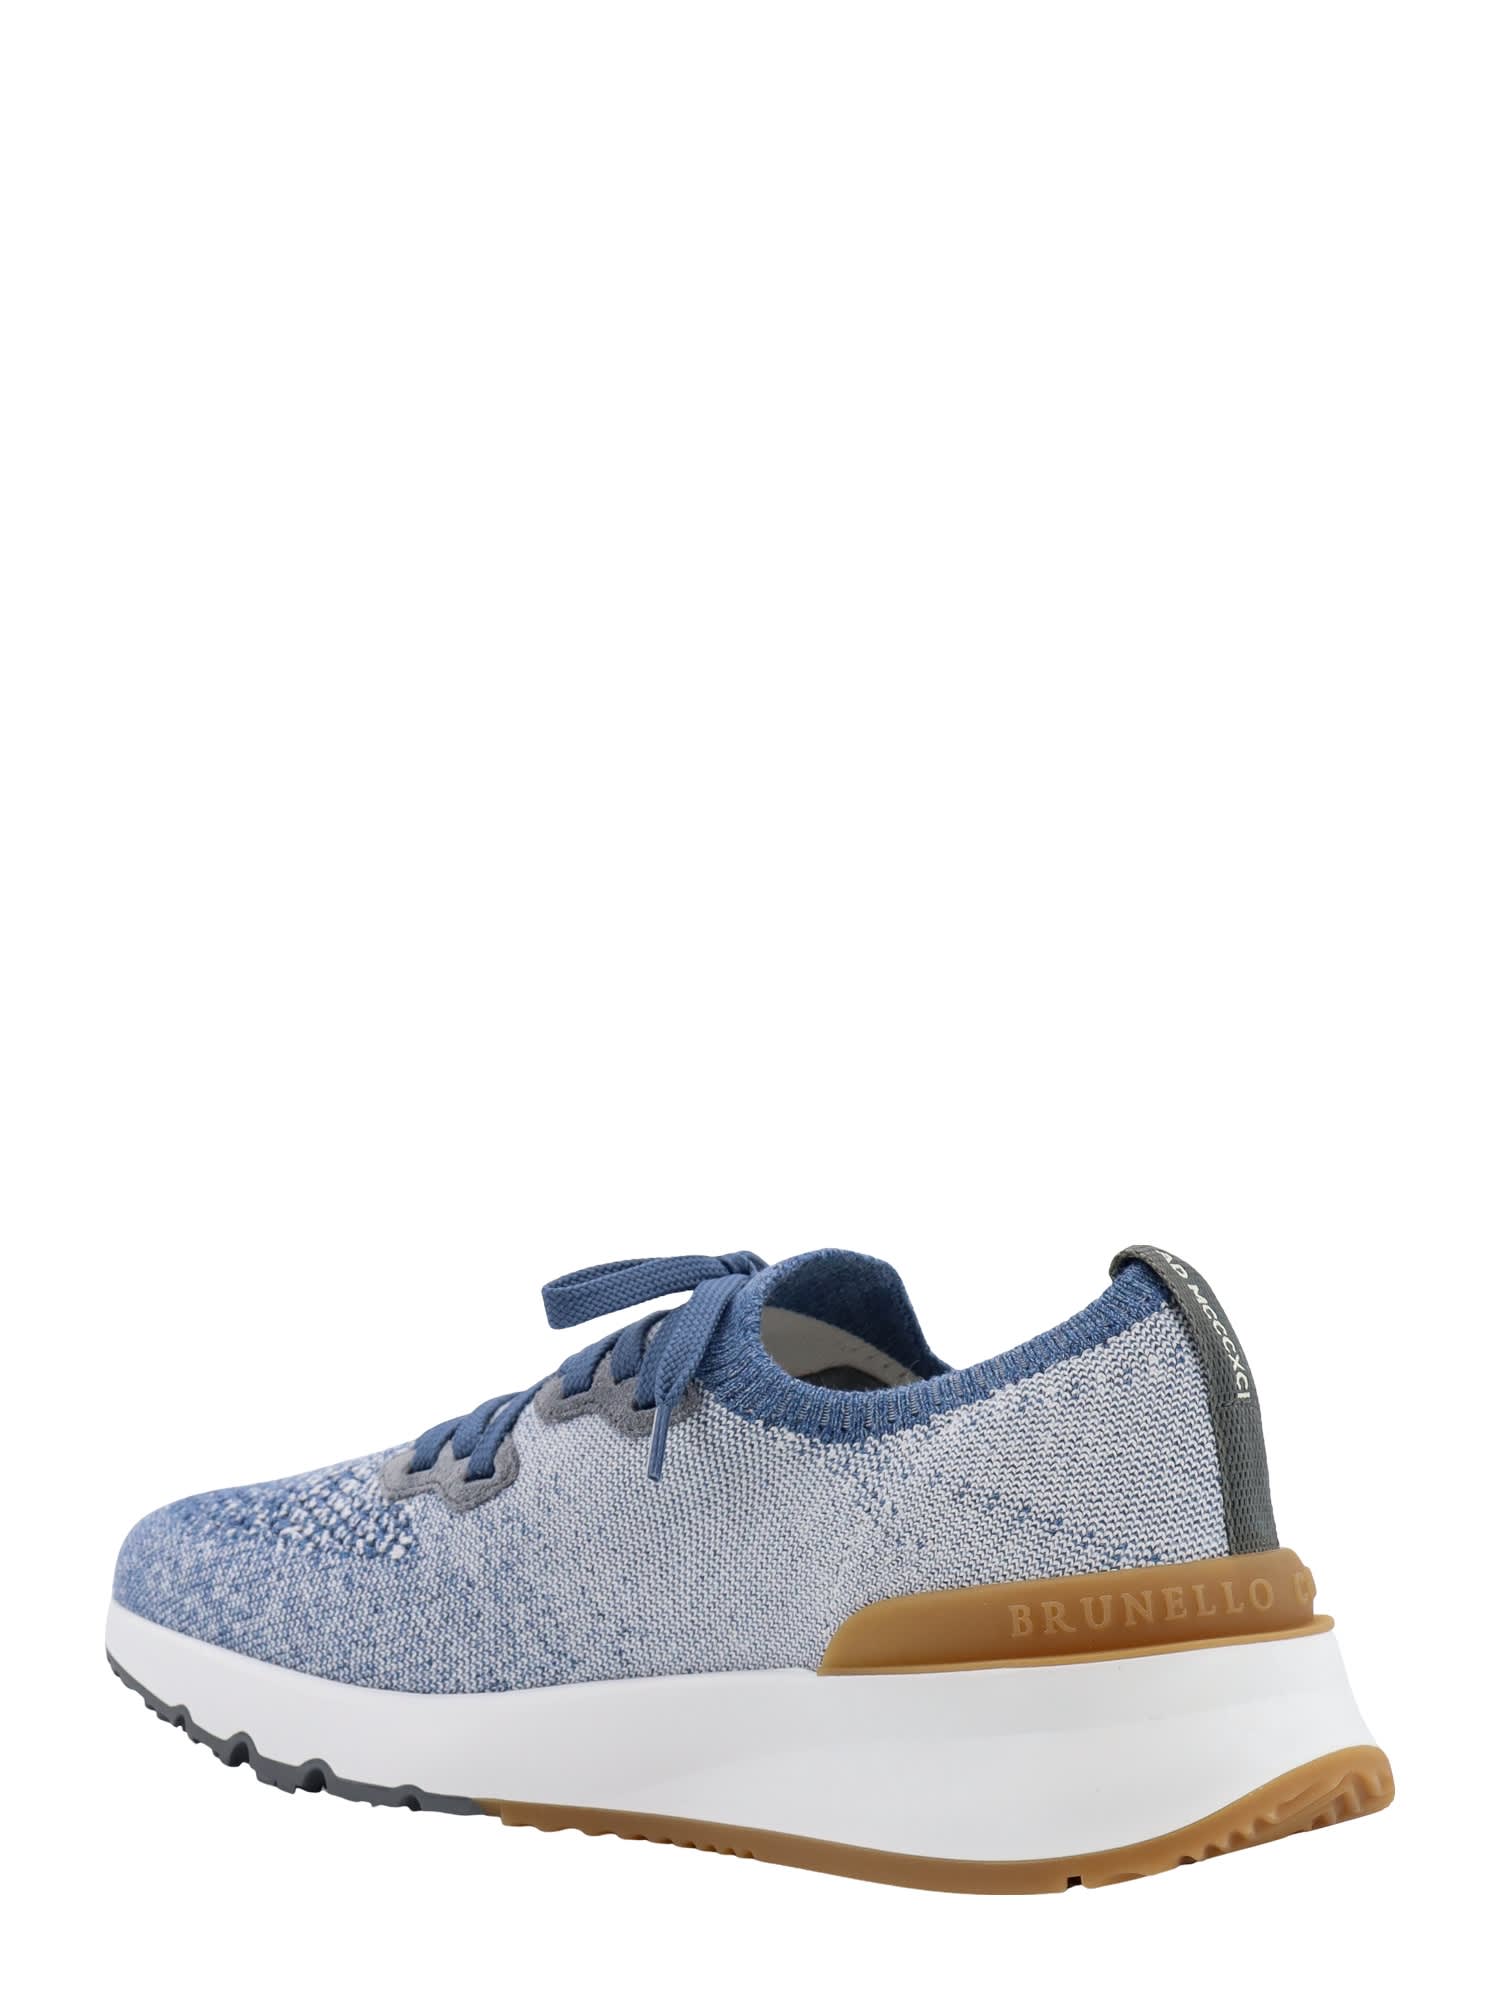 Shop Brunello Cucinelli Sneakers In Gnawed Blue